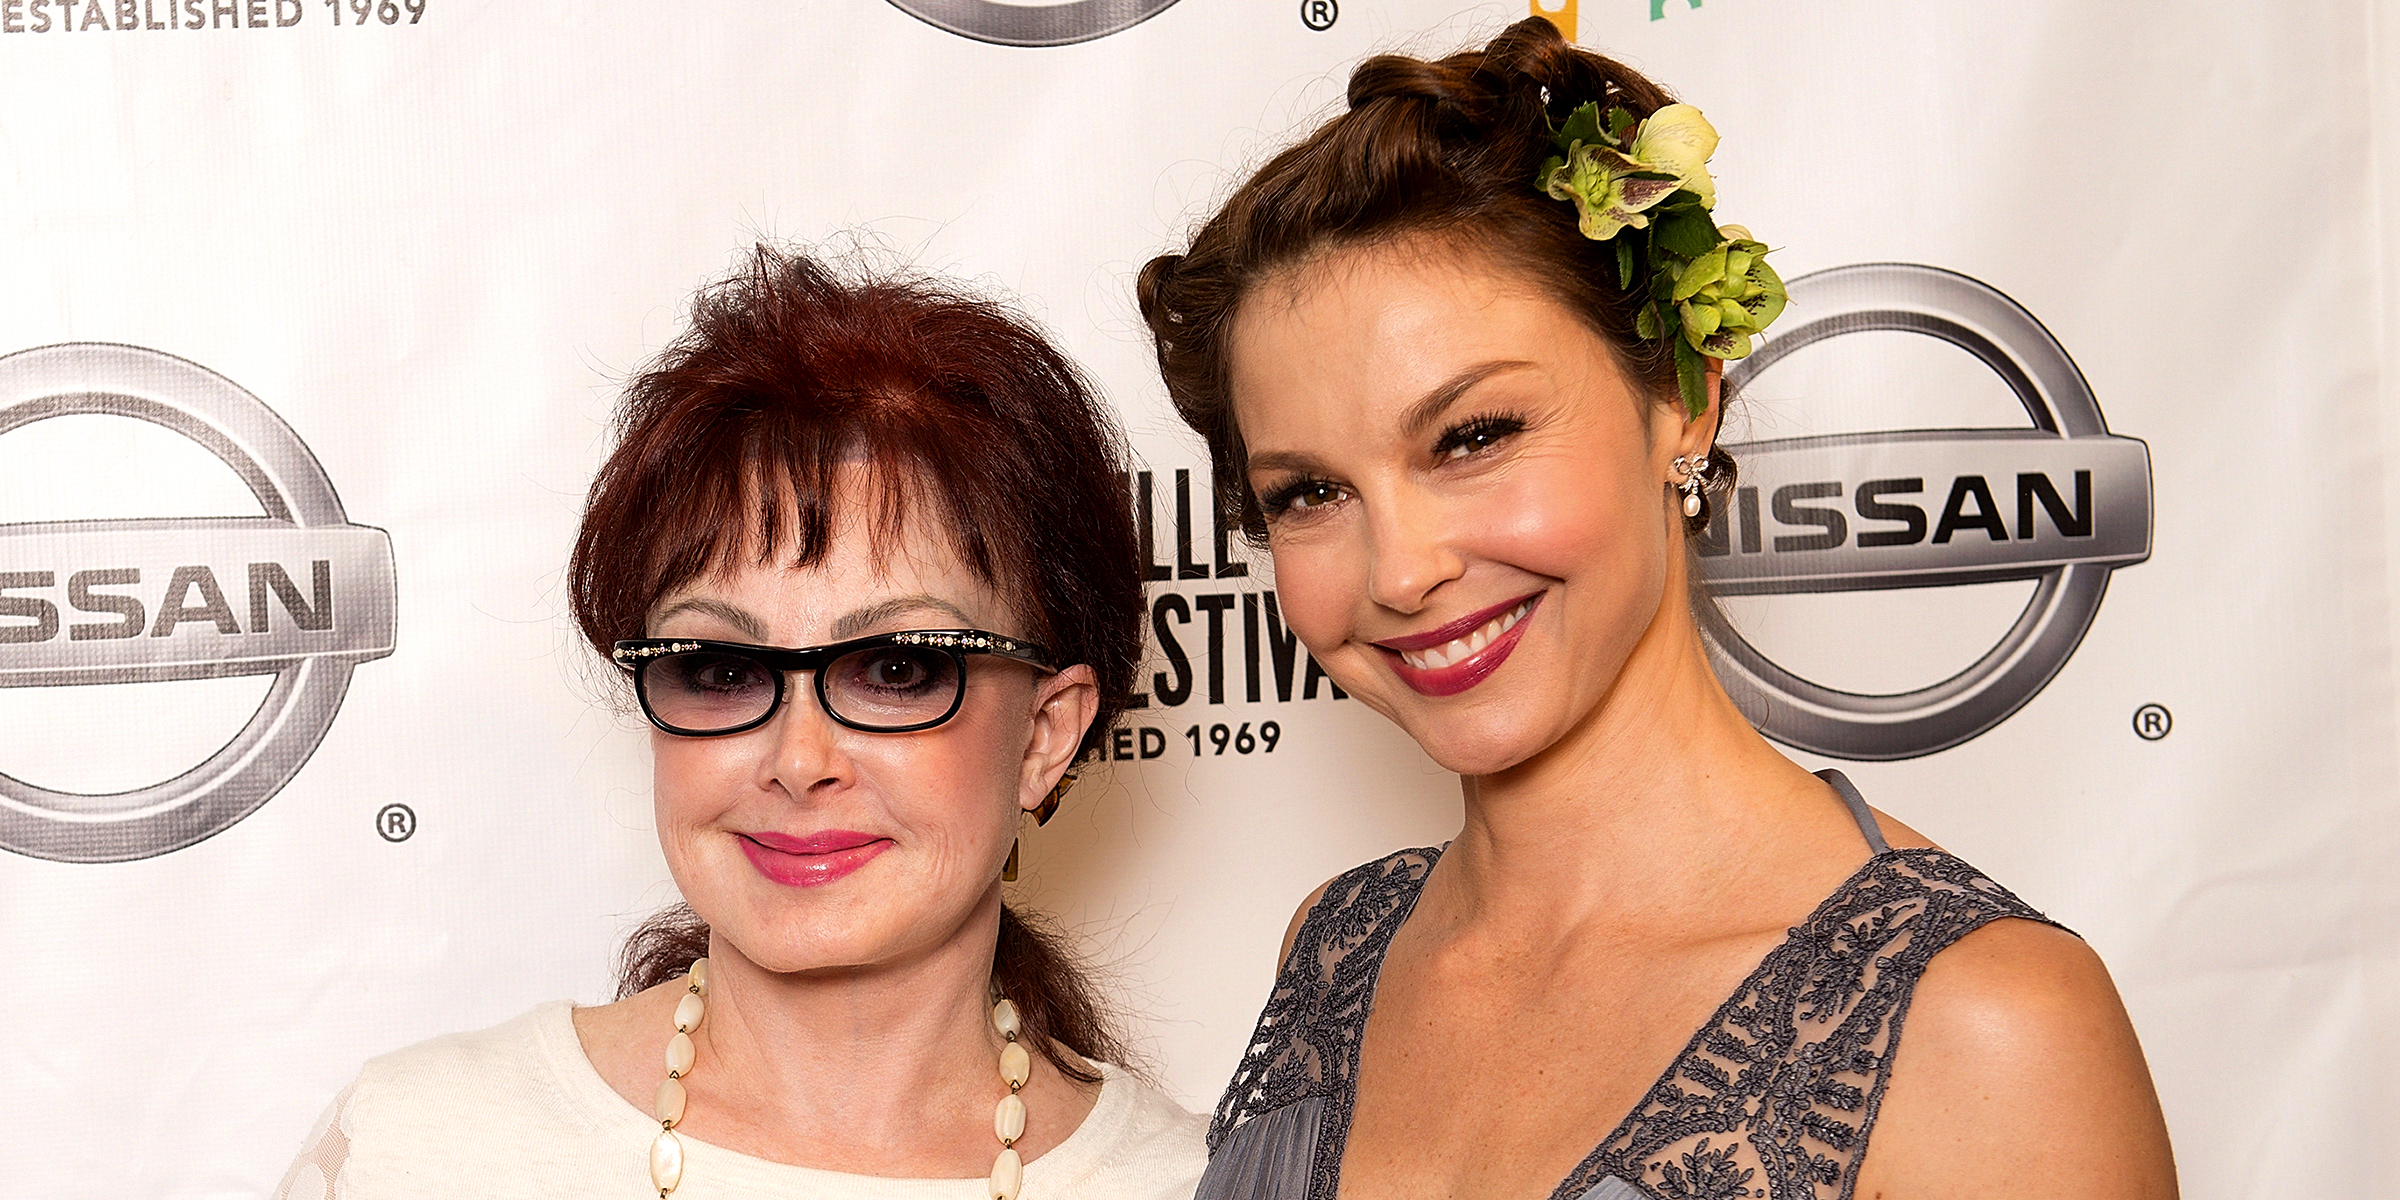 Naomi Judd and Ashley Judd. | Source: Getty Images